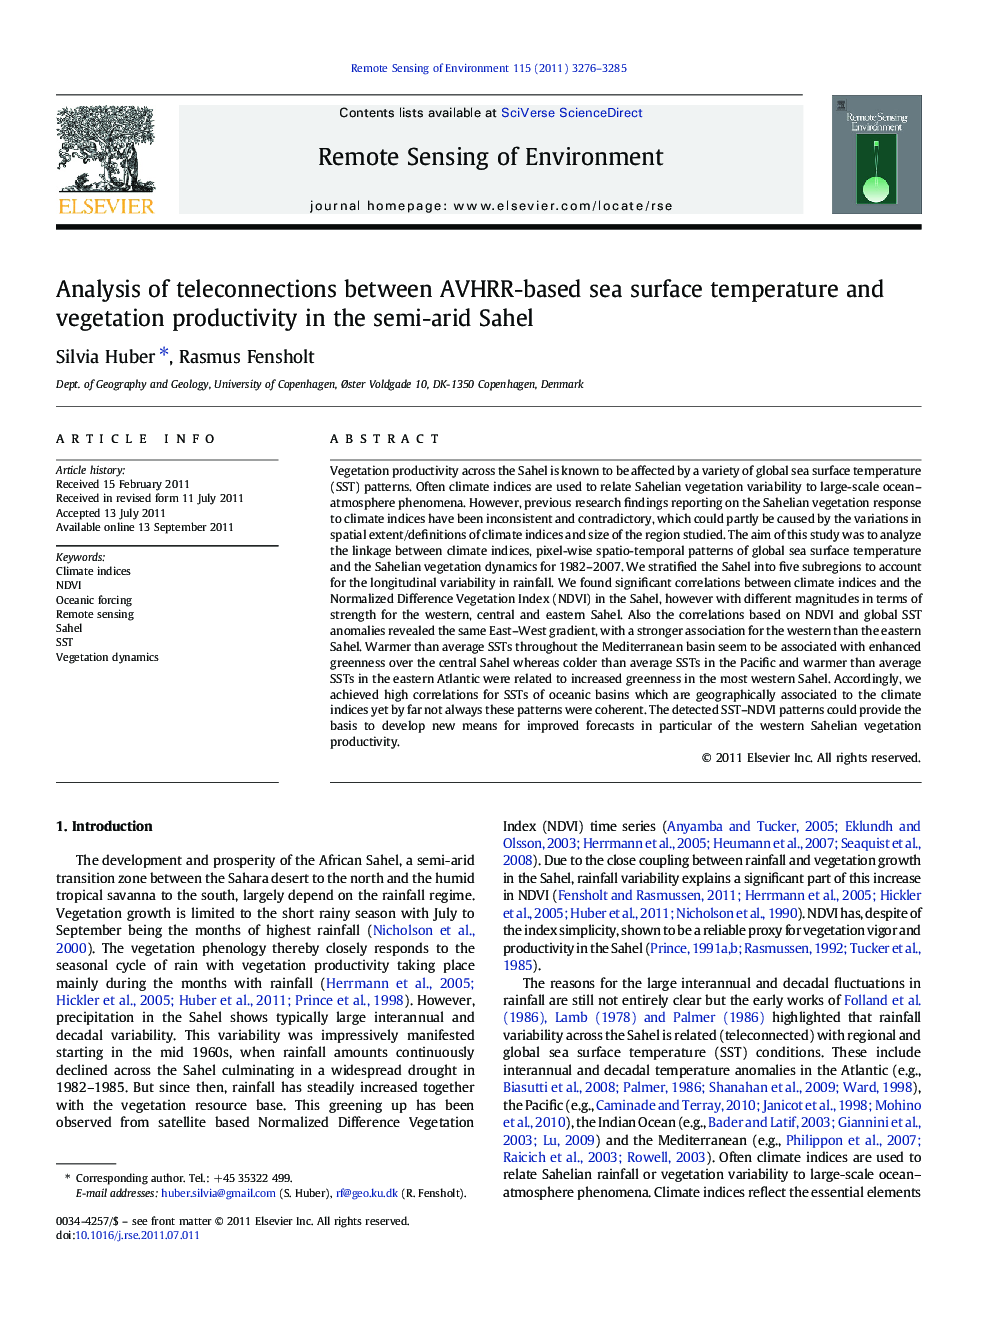 Analysis of teleconnections between AVHRR-based sea surface temperature and vegetation productivity in the semi-arid Sahel